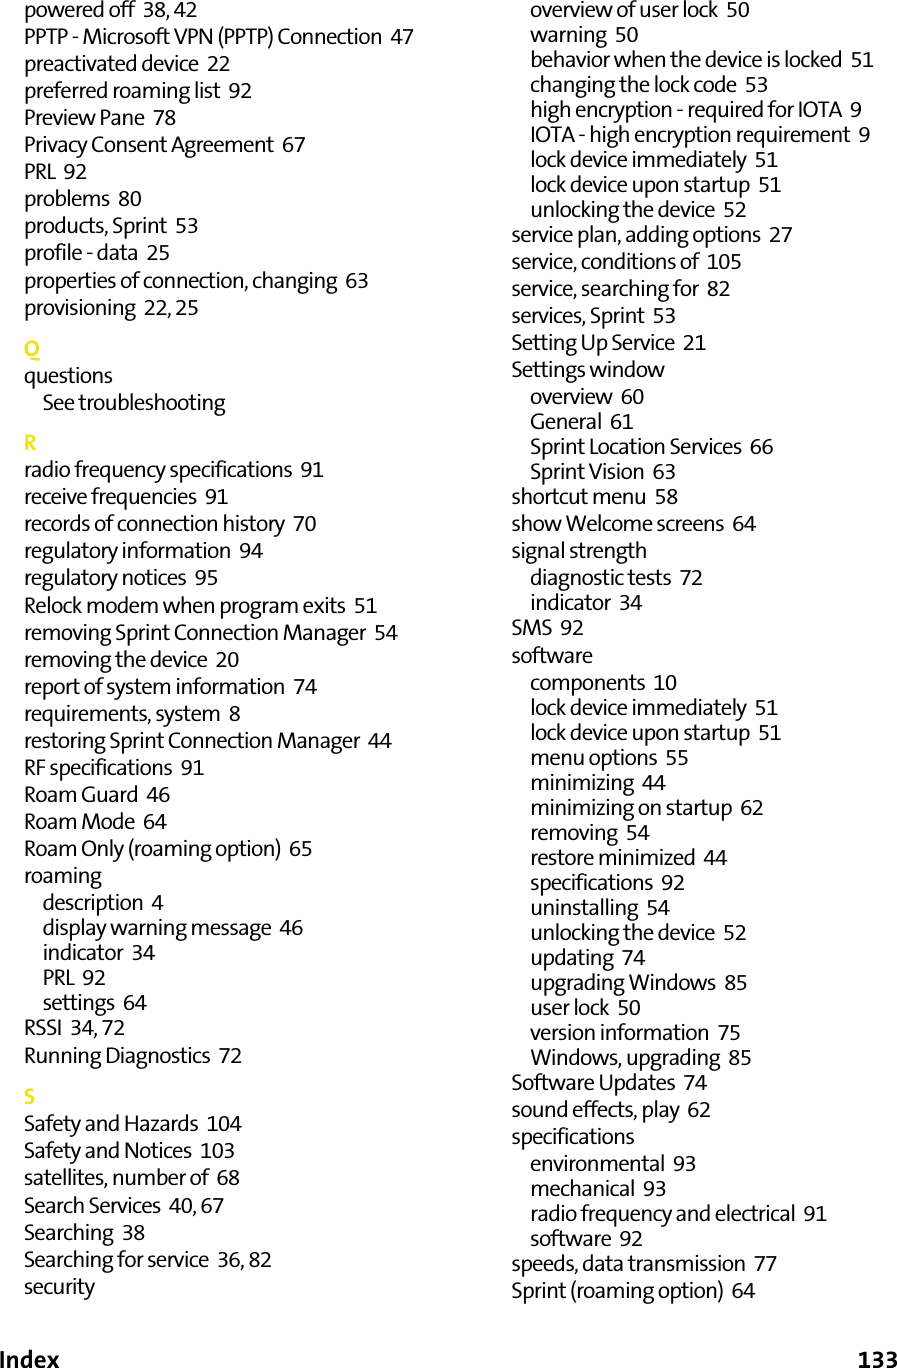 Index      133powered off  38, 42PPTP - Microsoft VPN (PPTP) Connection  47preactivated device  22preferred roaming list  92Preview Pane  78Privacy Consent Agreement  67PRL  92problems  80products, Sprint  53profile - data  25properties of connection, changing  63provisioning  22, 25QquestionsSee troubleshootingRradio frequency specifications  91receive frequencies  91records of connection history  70regulatory information  94regulatory notices  95Relock modem when program exits  51removing Sprint Connection Manager  54removing the device  20report of system information  74requirements, system  8restoring Sprint Connection Manager  44RF specifications  91Roam Guard  46Roam Mode  64Roam Only (roaming option)  65roamingdescription  4display warning message  46indicator  34PRL  92settings  64RSSI  34, 72Running Diagnostics  72SSafety and Hazards  104Safety and Notices  103satellites, number of  68Search Services  40, 67Searching  38Searching for service  36, 82securityoverview of user lock  50warning  50behavior when the device is locked  51changing the lock code  53high encryption - required for IOTA  9IOTA - high encryption requirement  9lock device immediately  51lock device upon startup  51unlocking the device  52service plan, adding options  27service, conditions of  105service, searching for  82services, Sprint  53Setting Up Service  21Settings windowoverview  60General  61Sprint Location Services  66Sprint Vision  63shortcut menu  58show Welcome screens  64signal strengthdiagnostic tests  72indicator  34SMS  92softwarecomponents  10lock device immediately  51lock device upon startup  51menu options  55minimizing  44minimizing on startup  62removing  54restore minimized  44specifications  92uninstalling  54unlocking the device  52updating  74upgrading Windows  85user lock  50version information  75Windows, upgrading  85Software Updates  74sound effects, play  62specificationsenvironmental  93mechanical  93radio frequency and electrical  91software  92speeds, data transmission  77Sprint (roaming option)  64